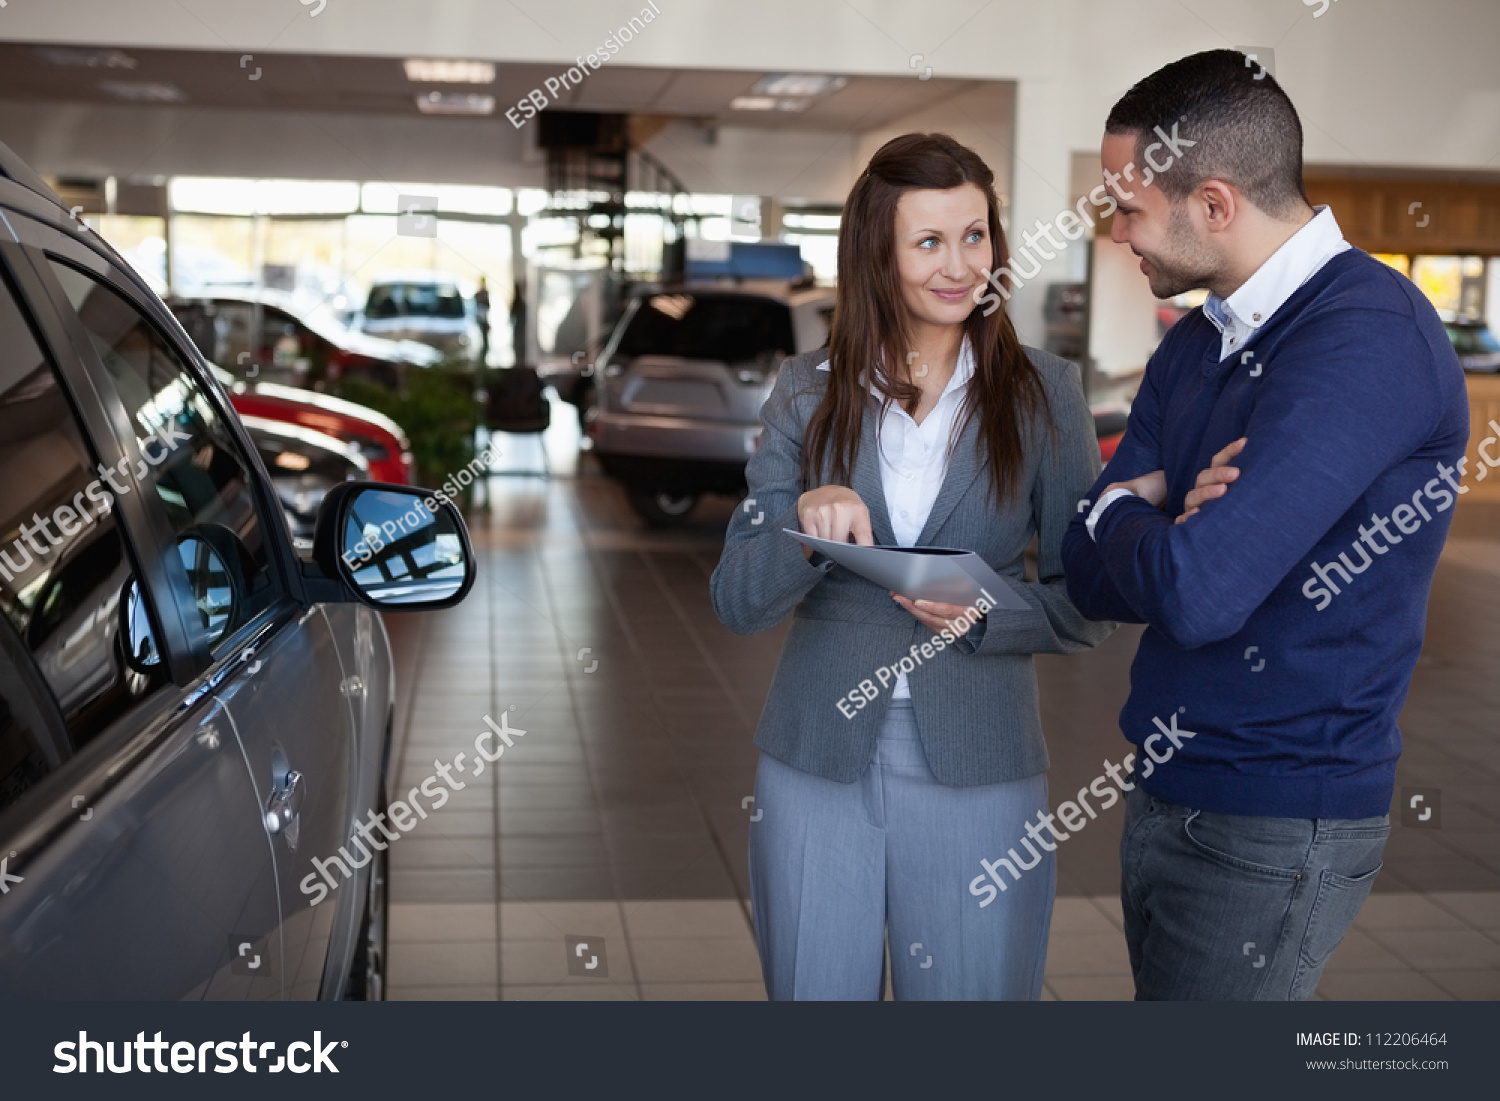 Woman explaining something to a man in a dealership #112206464